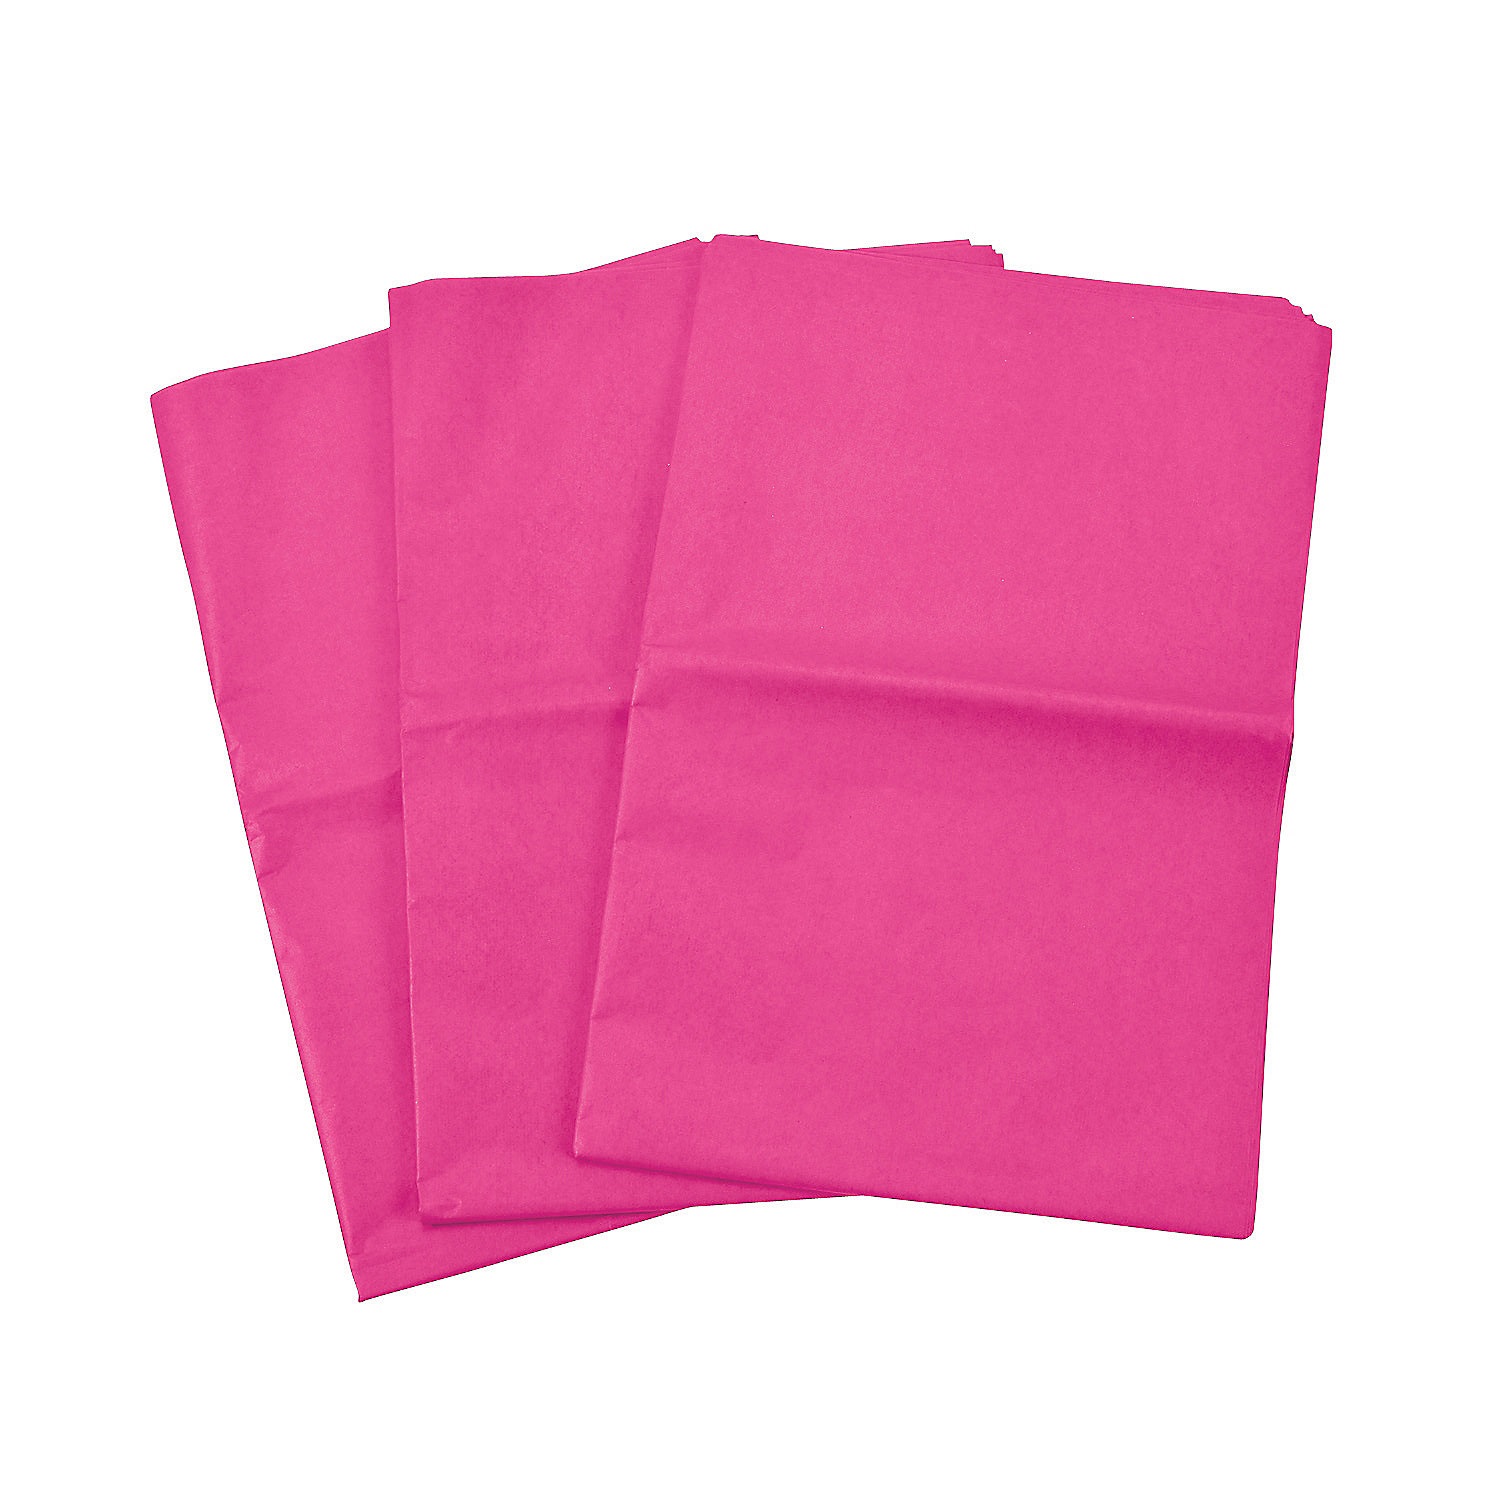 pink-tissue-paper-sheets-60-pc-_48_7372